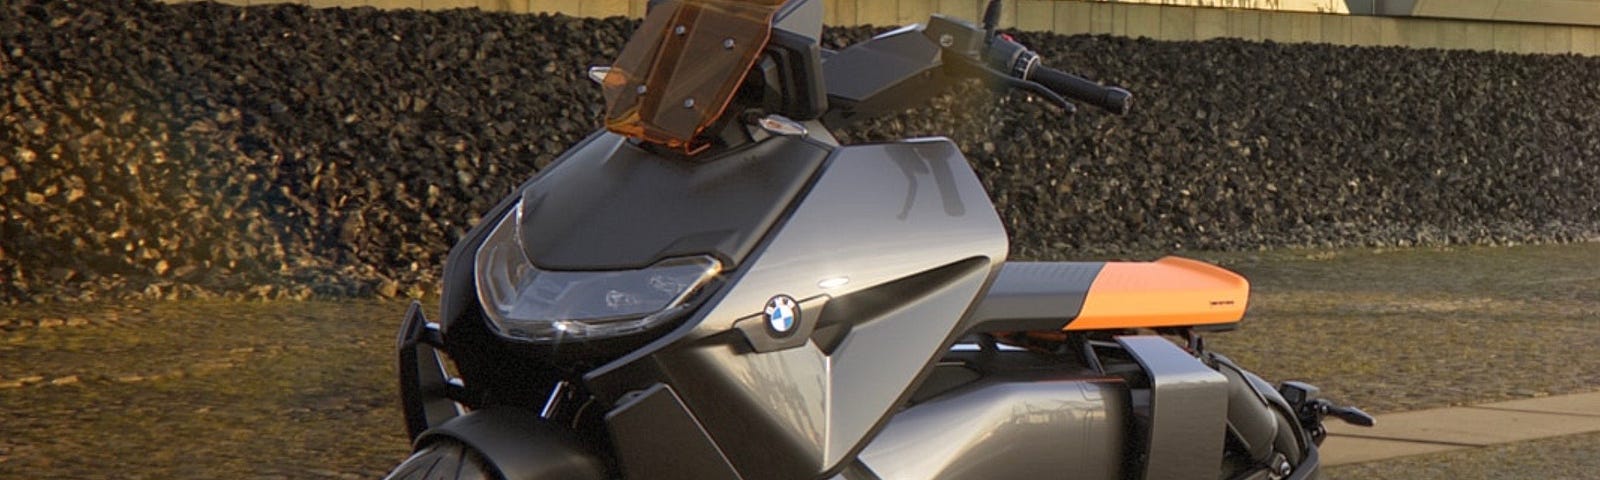 A side-view look at the electric CE 04 motorcycle offering from BMW.